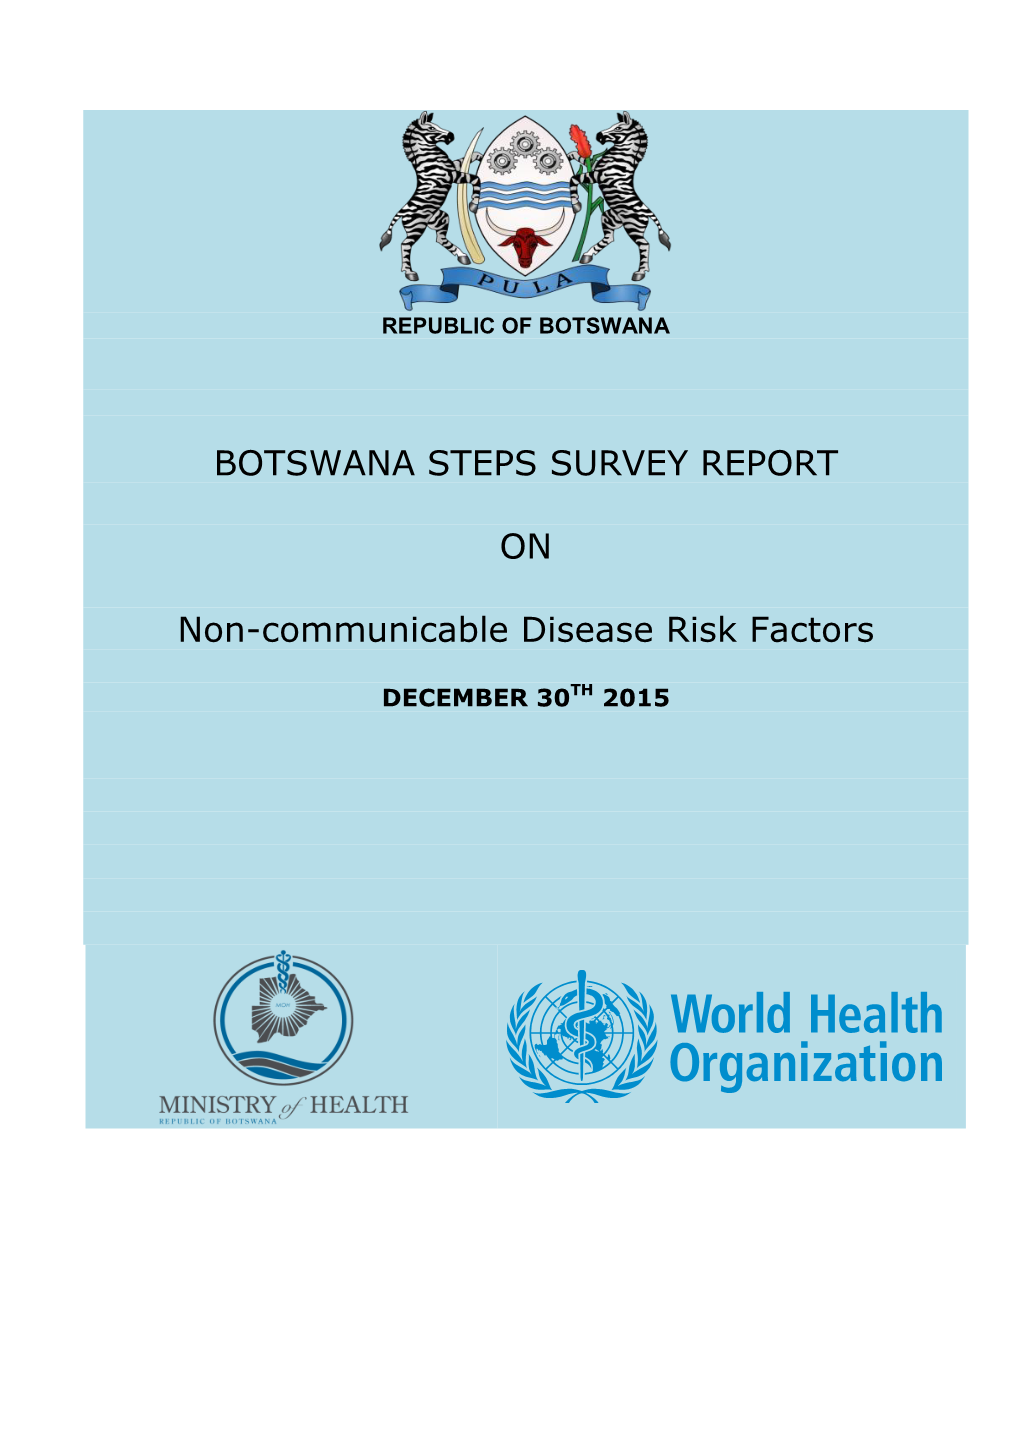 BOTSWANA STEPS SURVEY REPORT on Non-Communicable